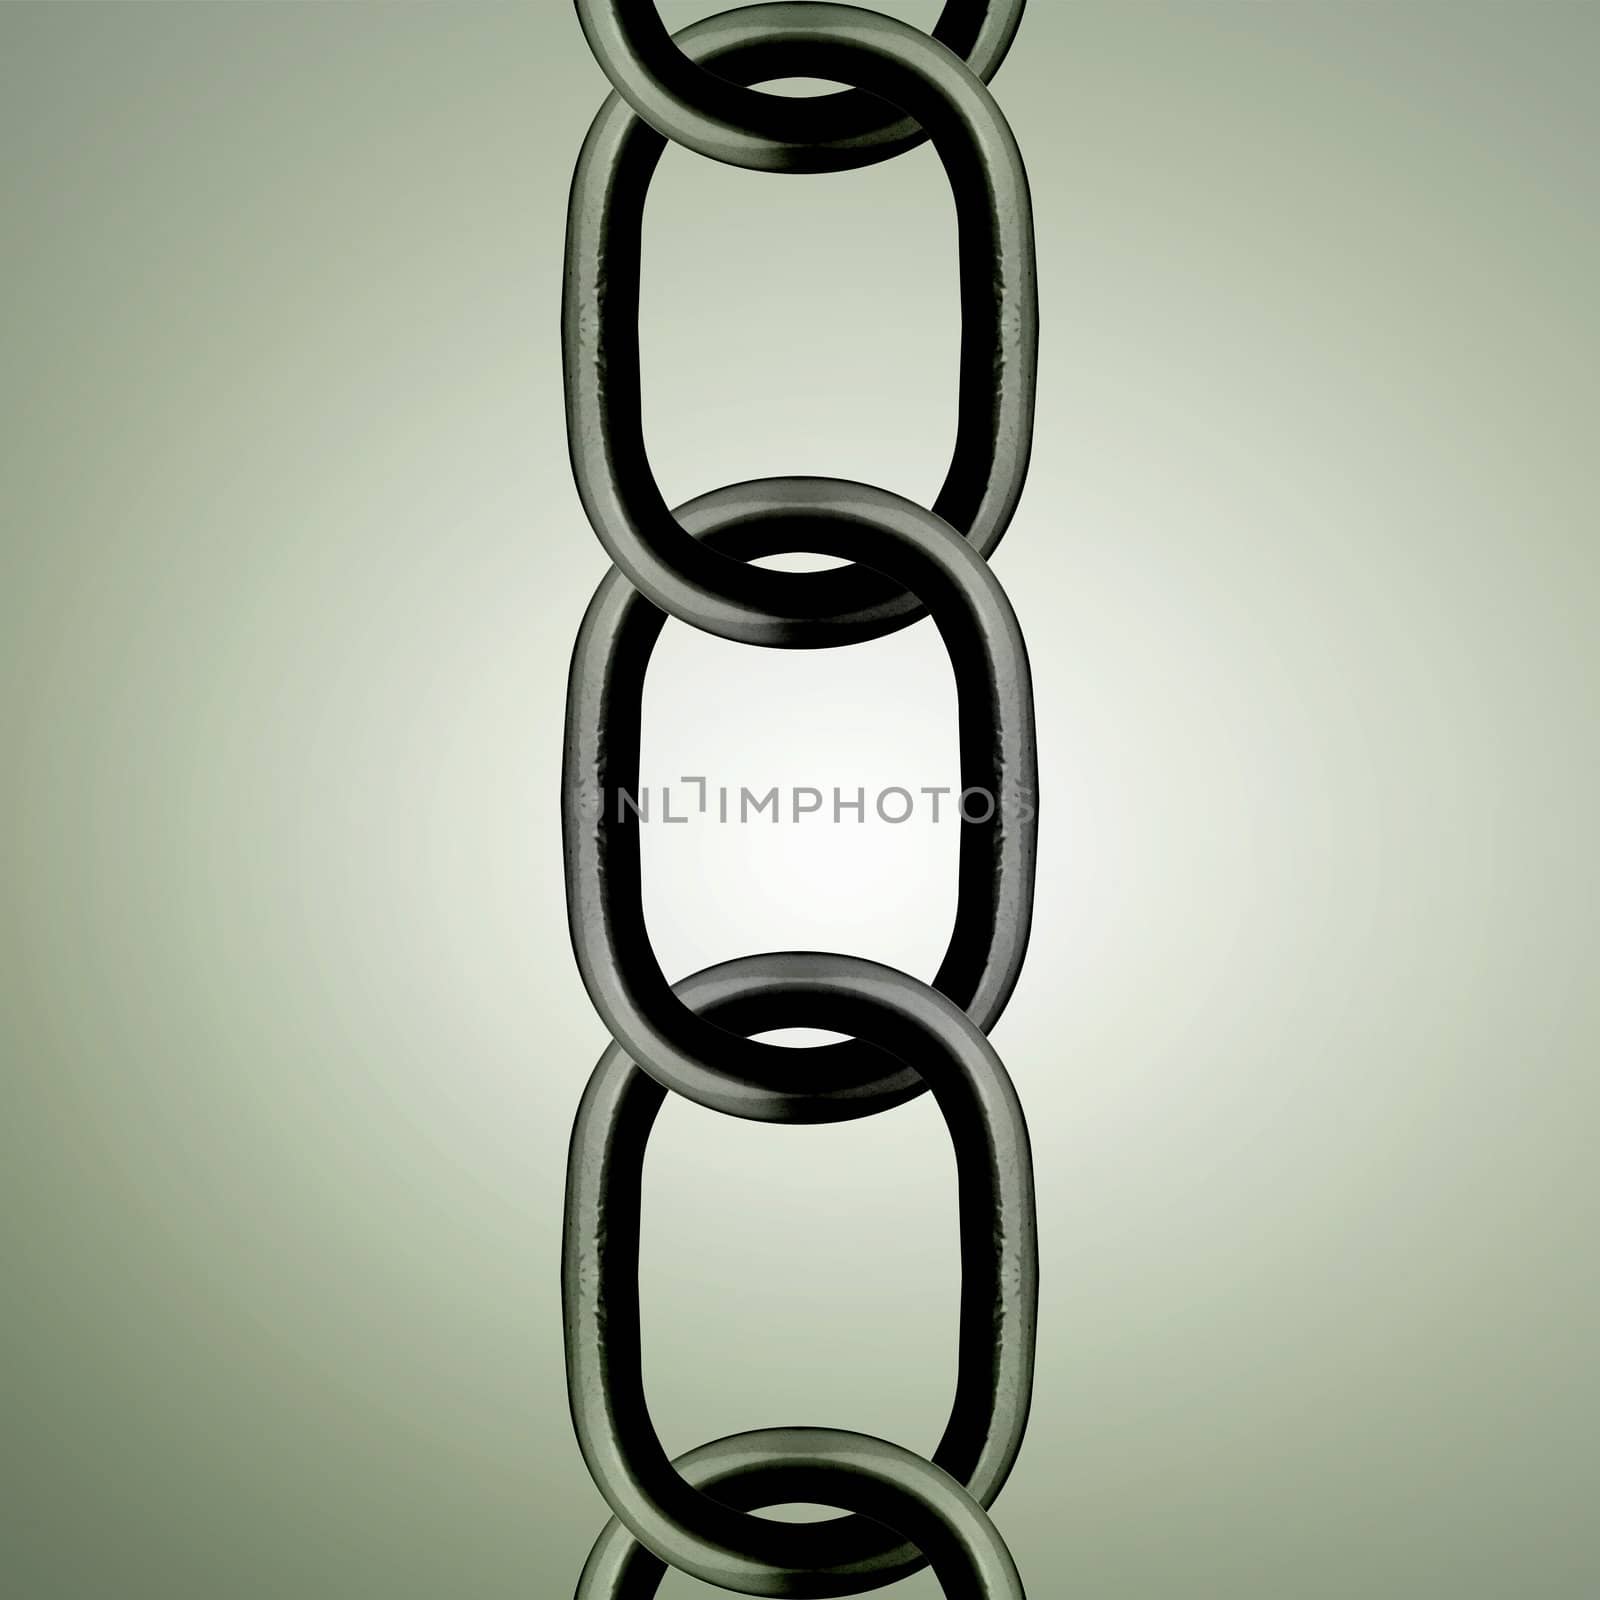 Metal chain parts background.